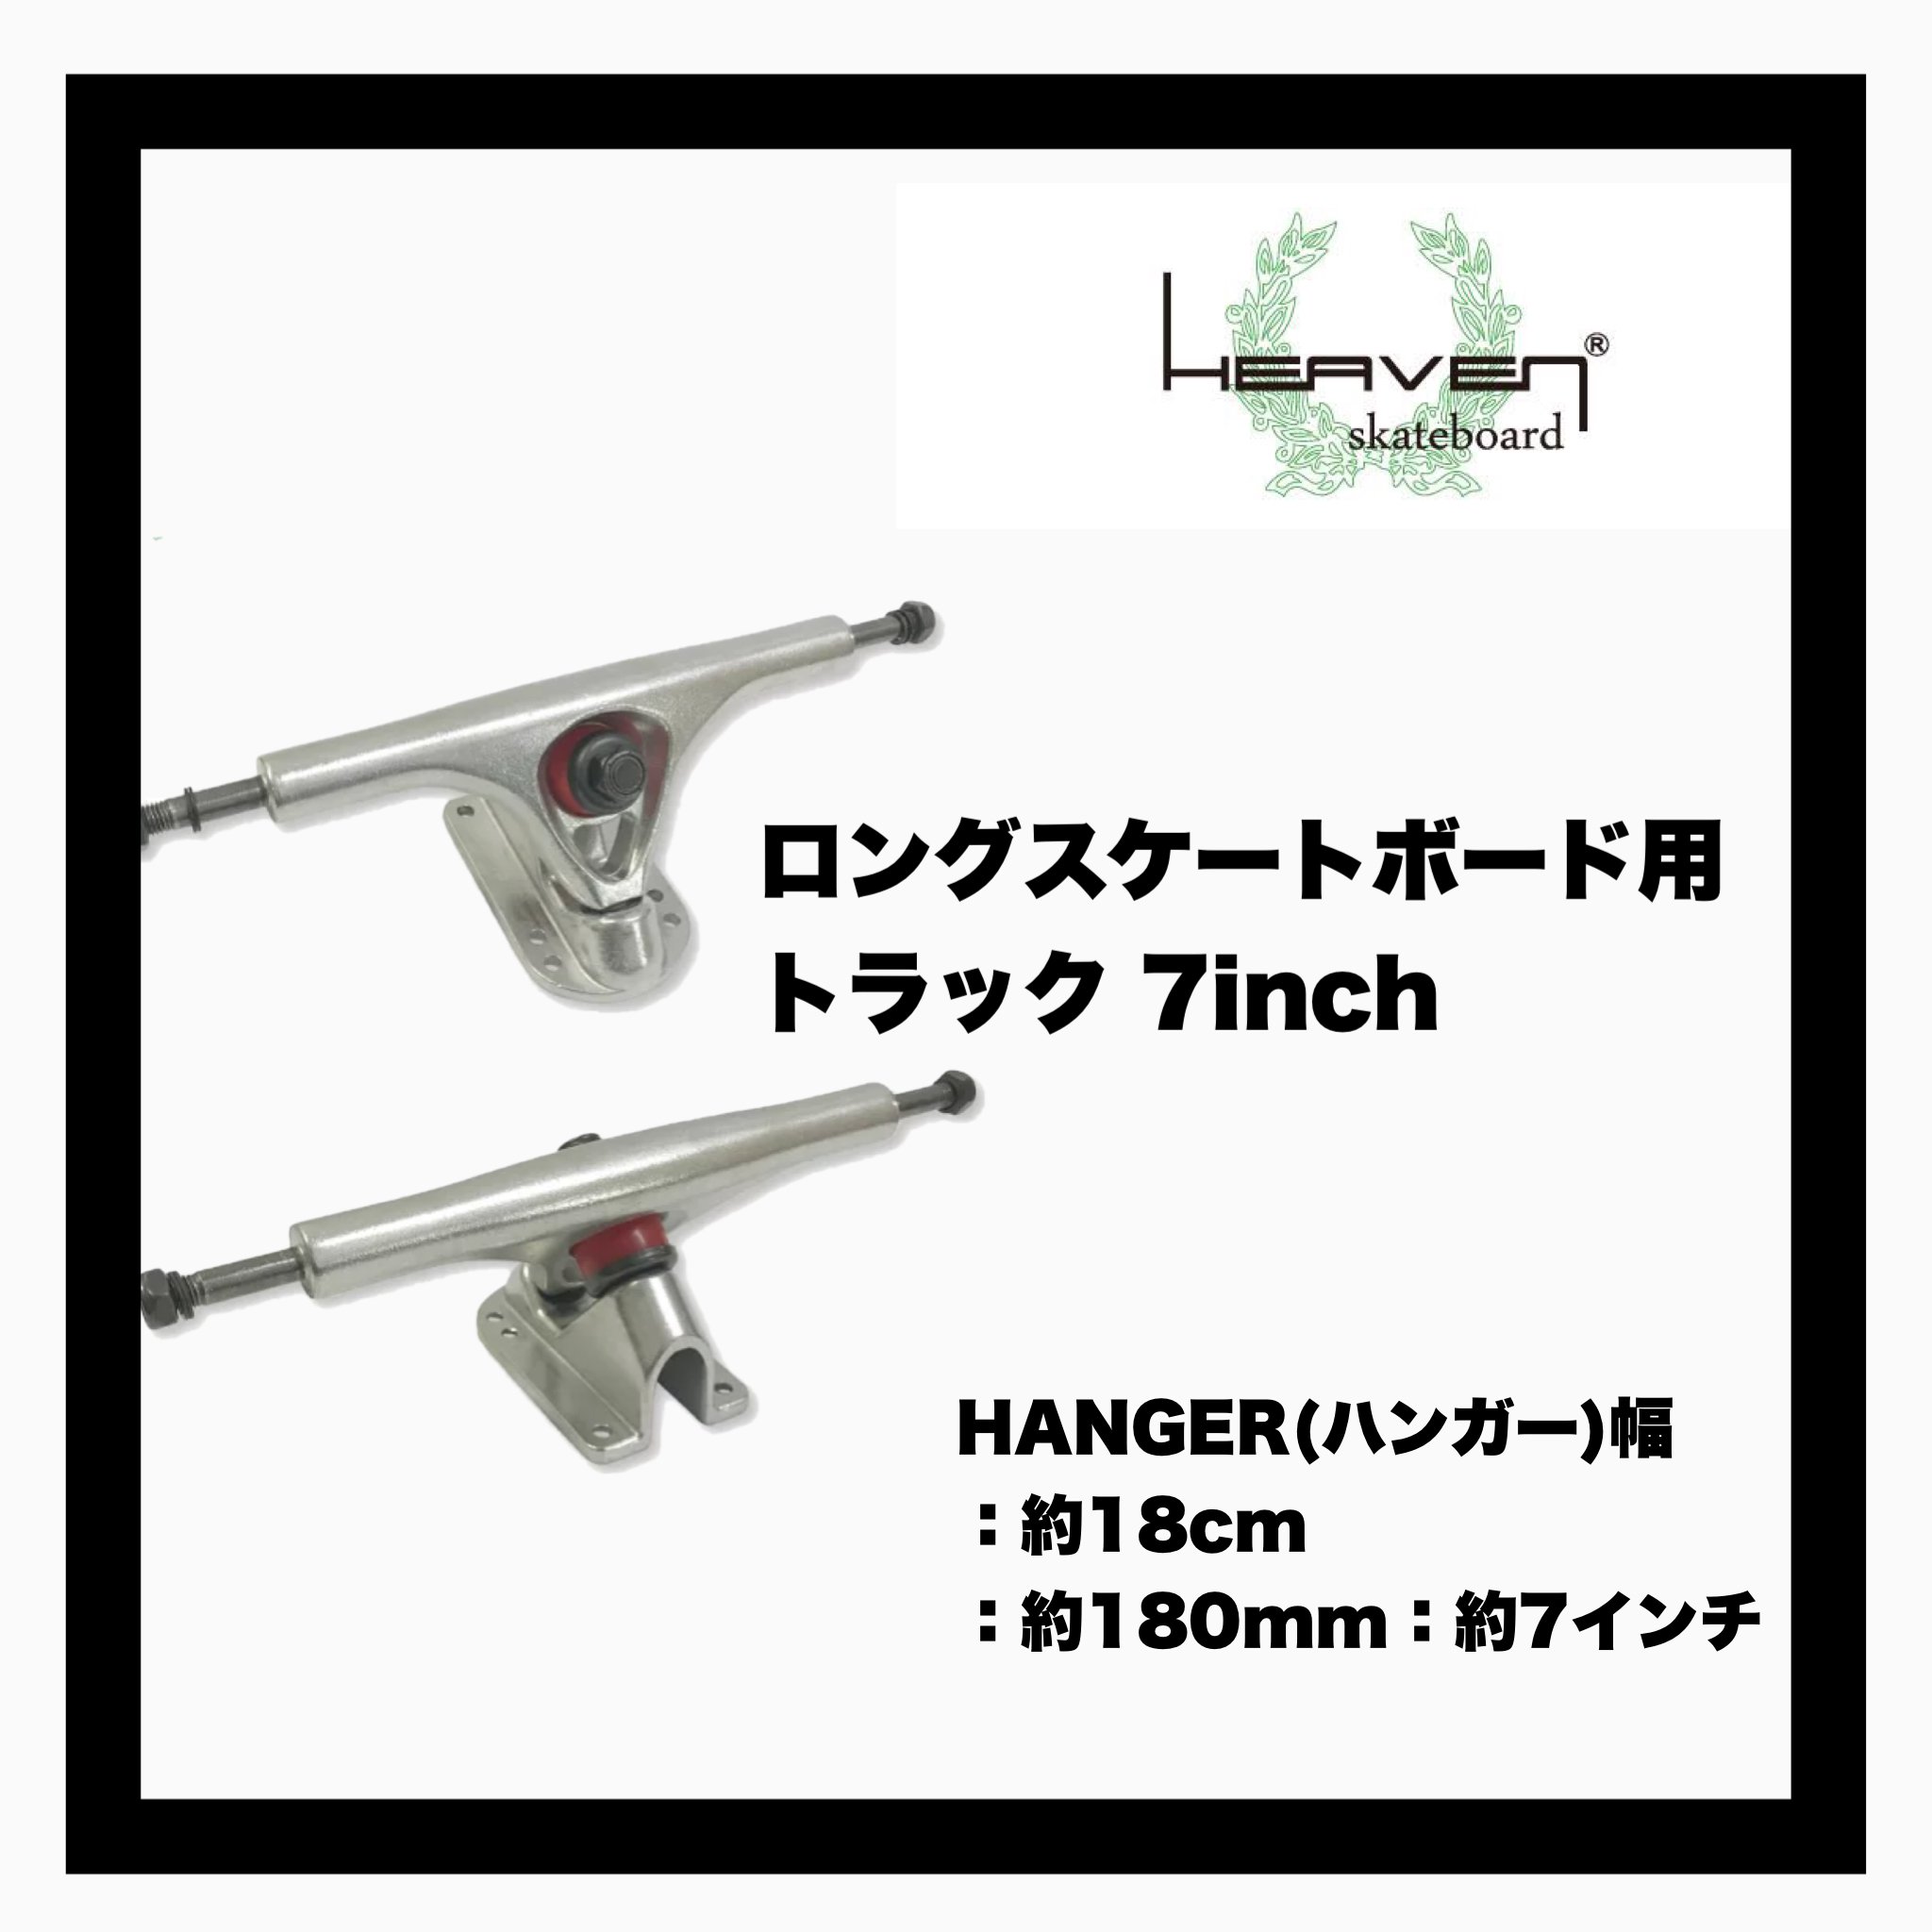 <img class='new_mark_img1' src='https://img.shop-pro.jp/img/new/icons14.gif' style='border:none;display:inline;margin:0px;padding:0px;width:auto;' />HEAVEN SKATEBOARD SKATE TRUCK7inch set